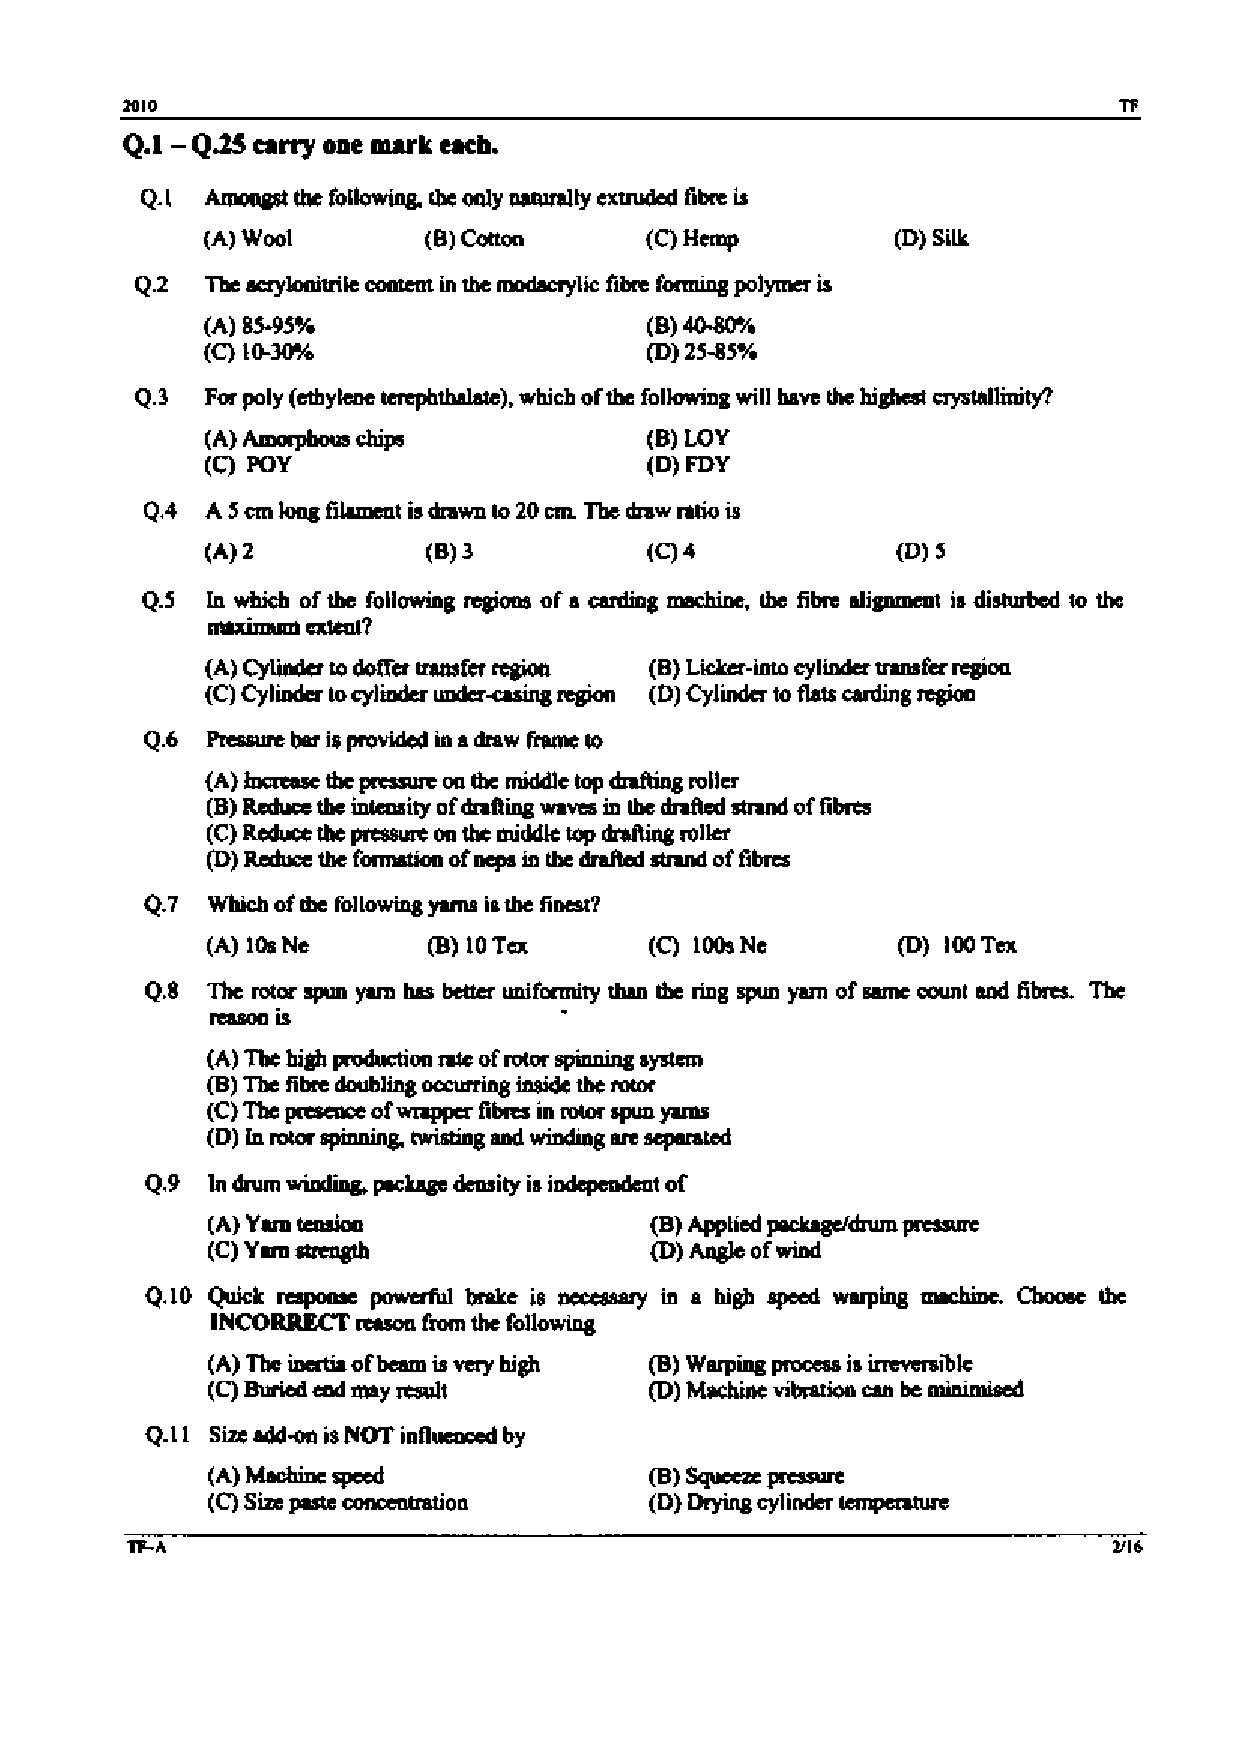 GATE Exam Question Paper 2010 Textile Engineering and Fibre Science 2